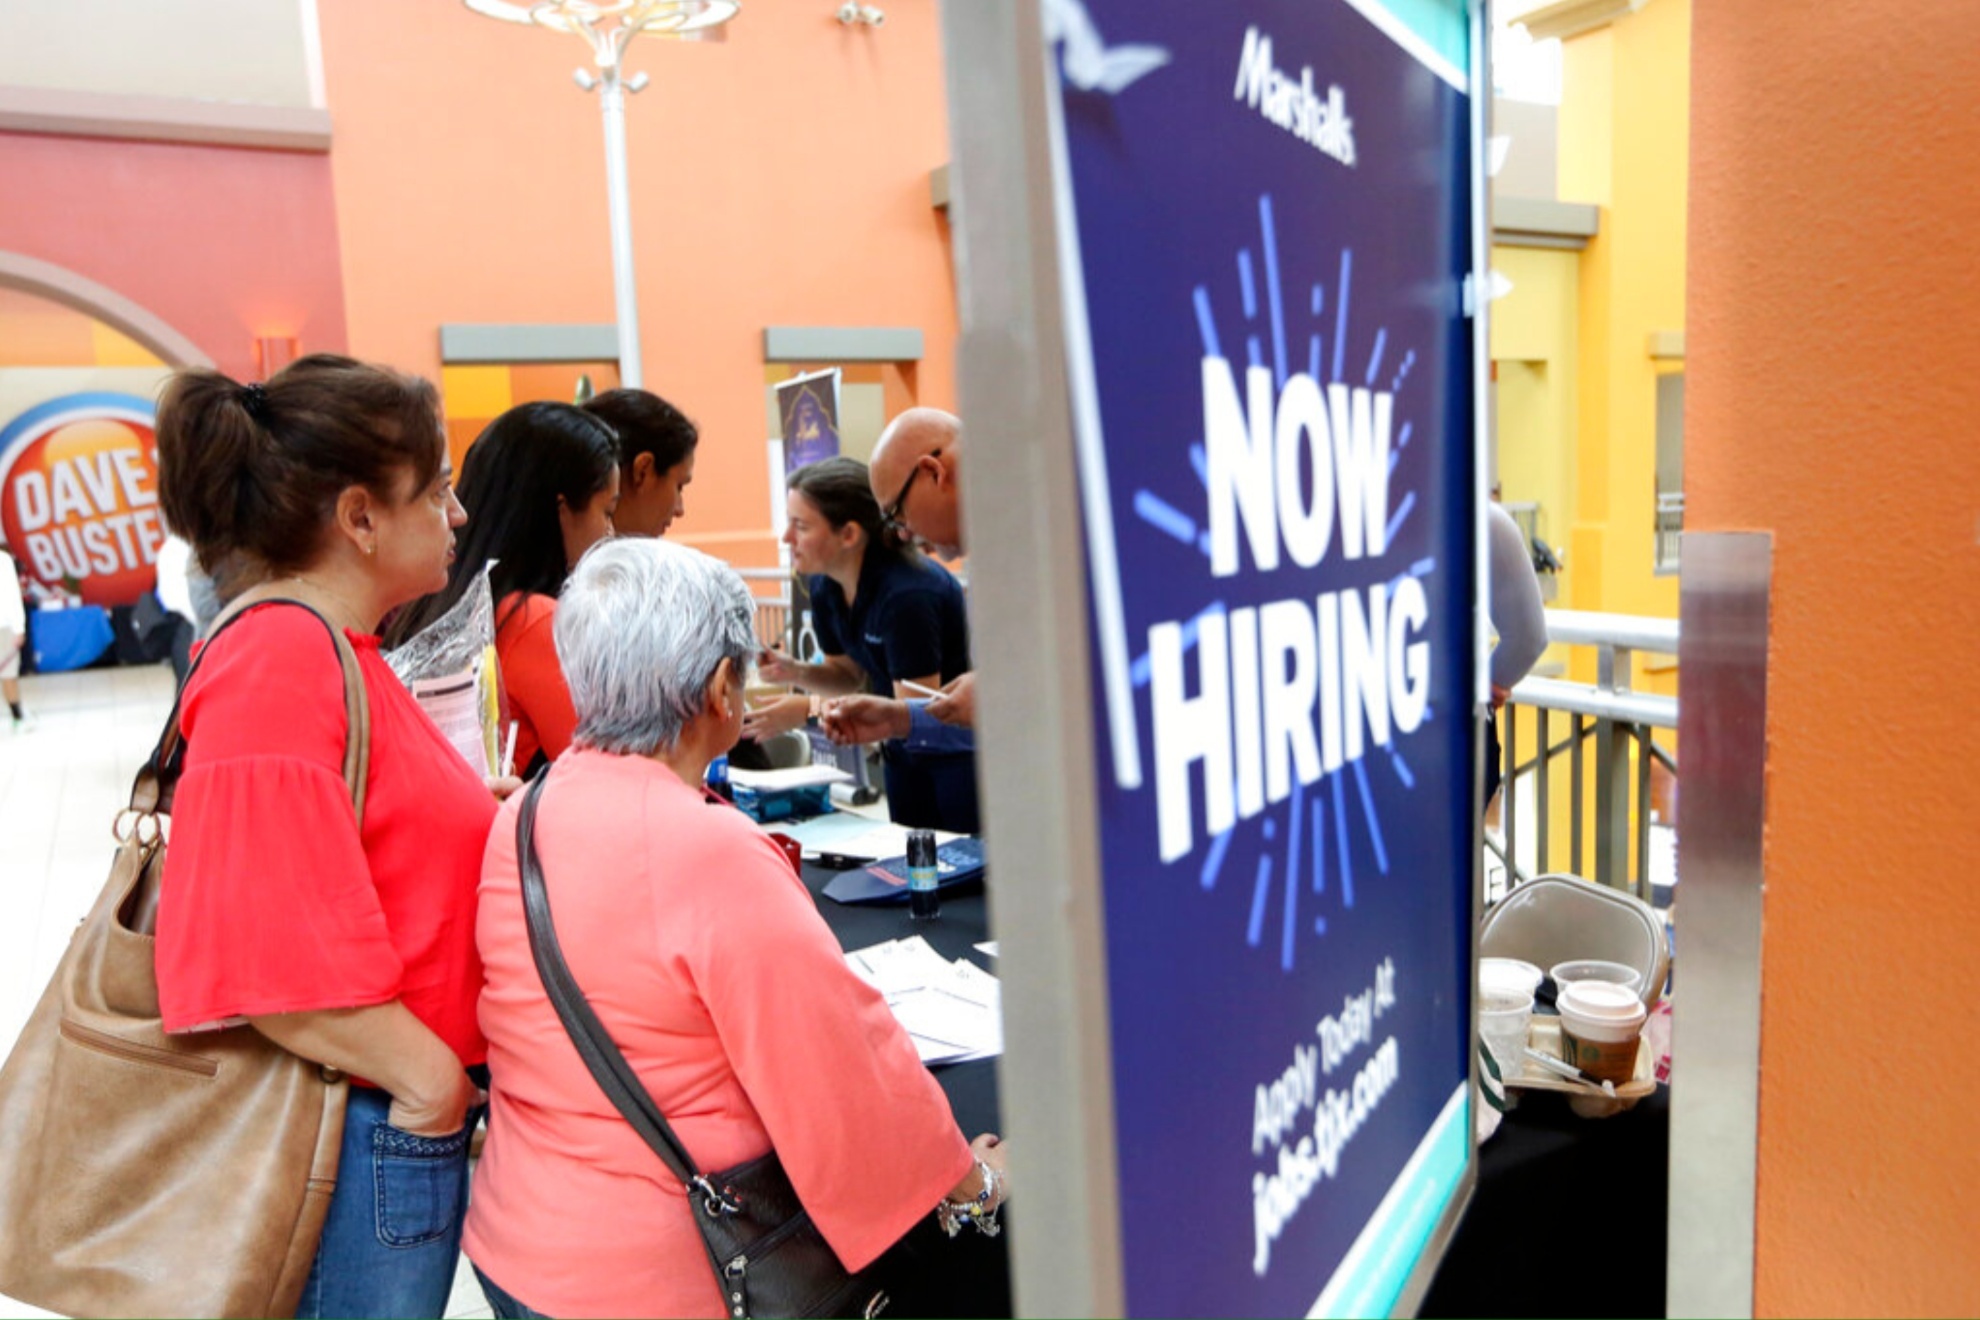 Florida offers unemployment benefits for up to 19 weeks